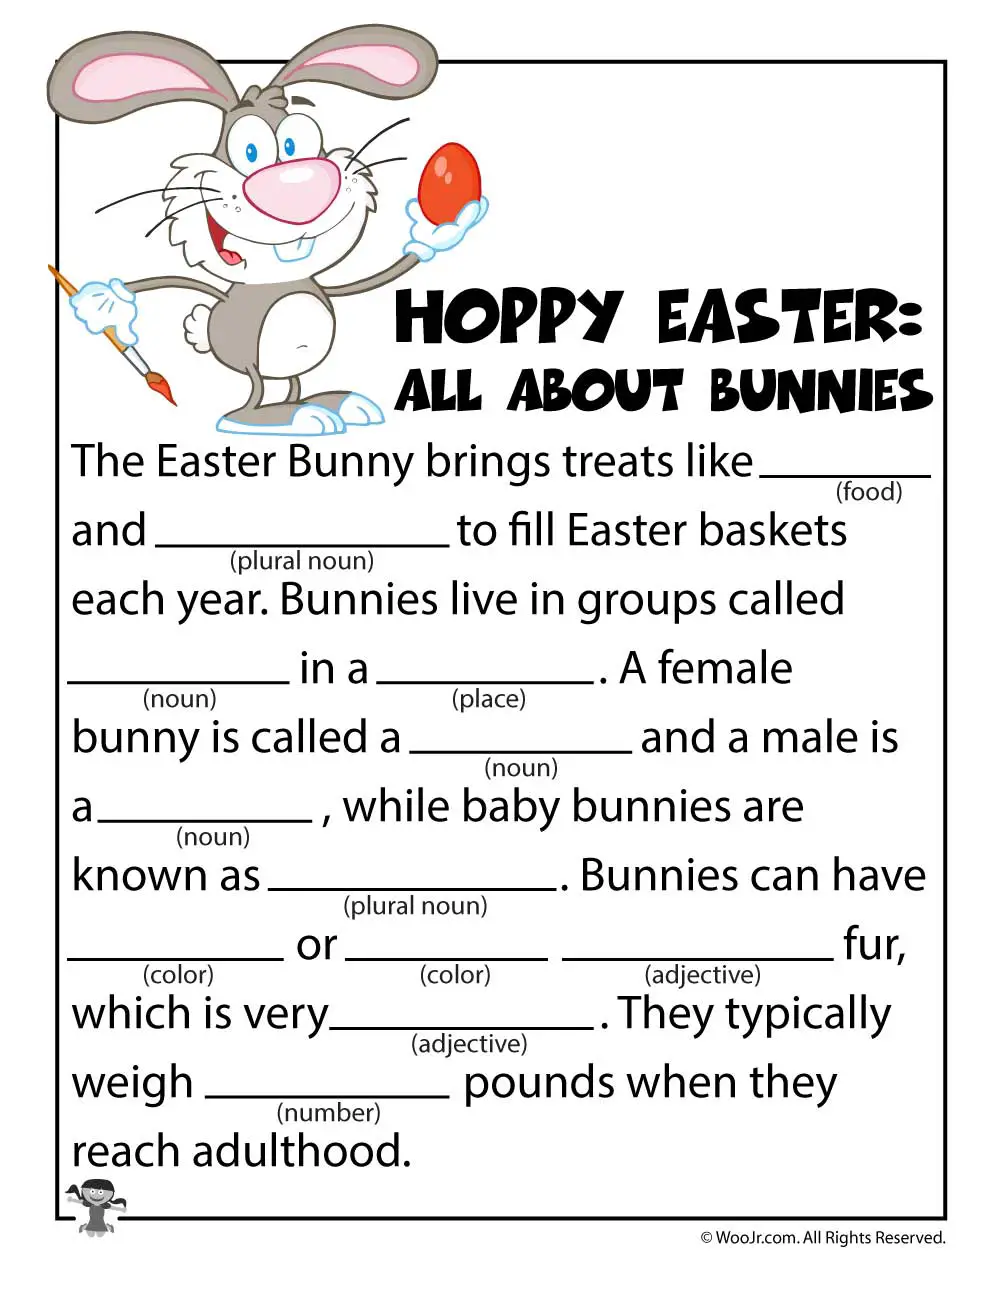 5 Festive Easter Mad Libs for Pure Holiday Fun Kitty Baby Love